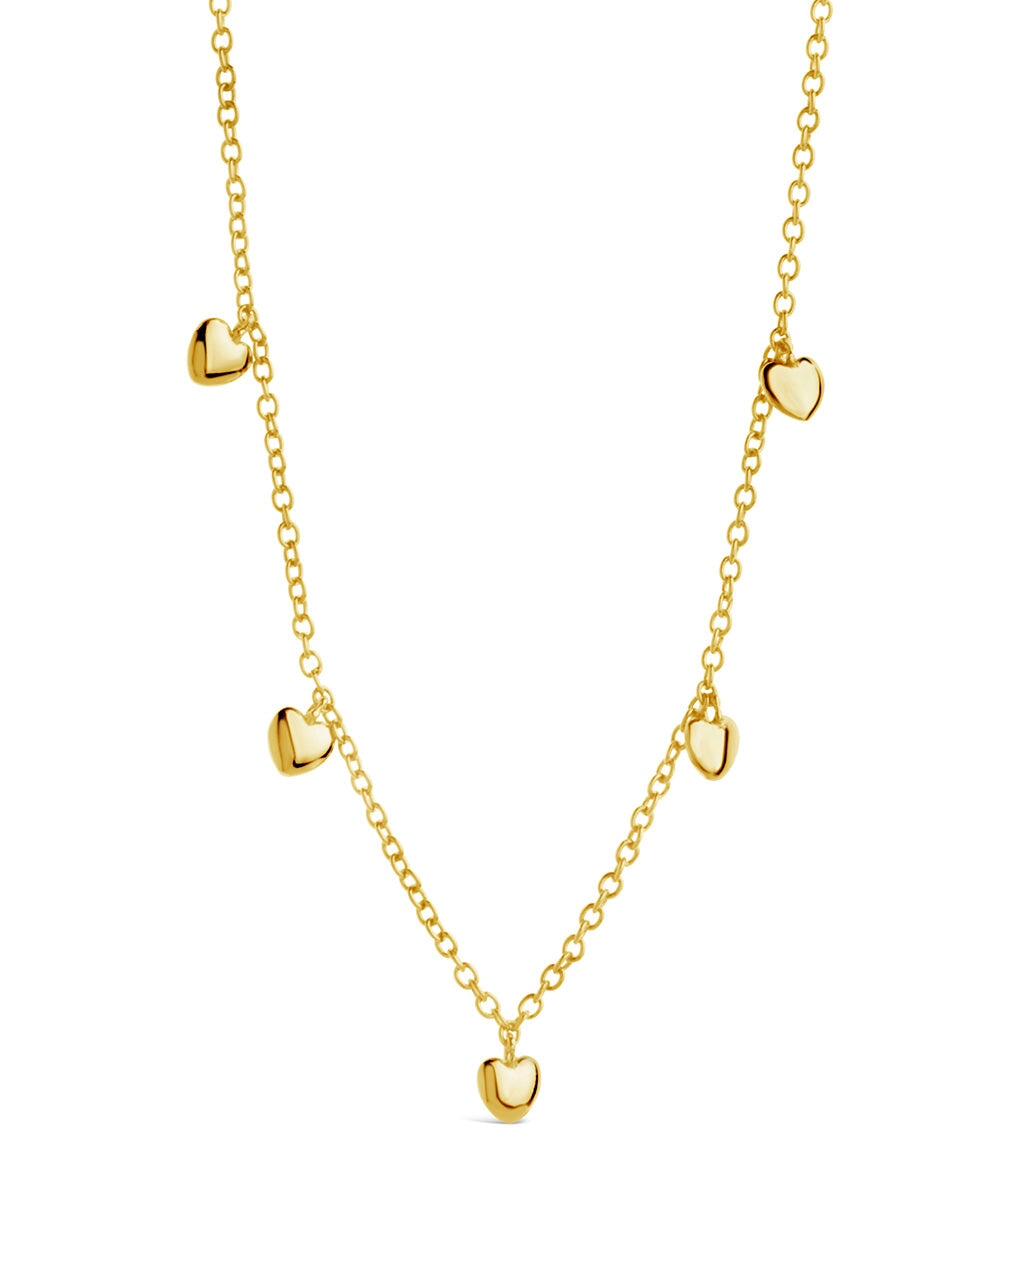 Stationed Heart Charm Necklace Necklace Sterling Forever Gold 